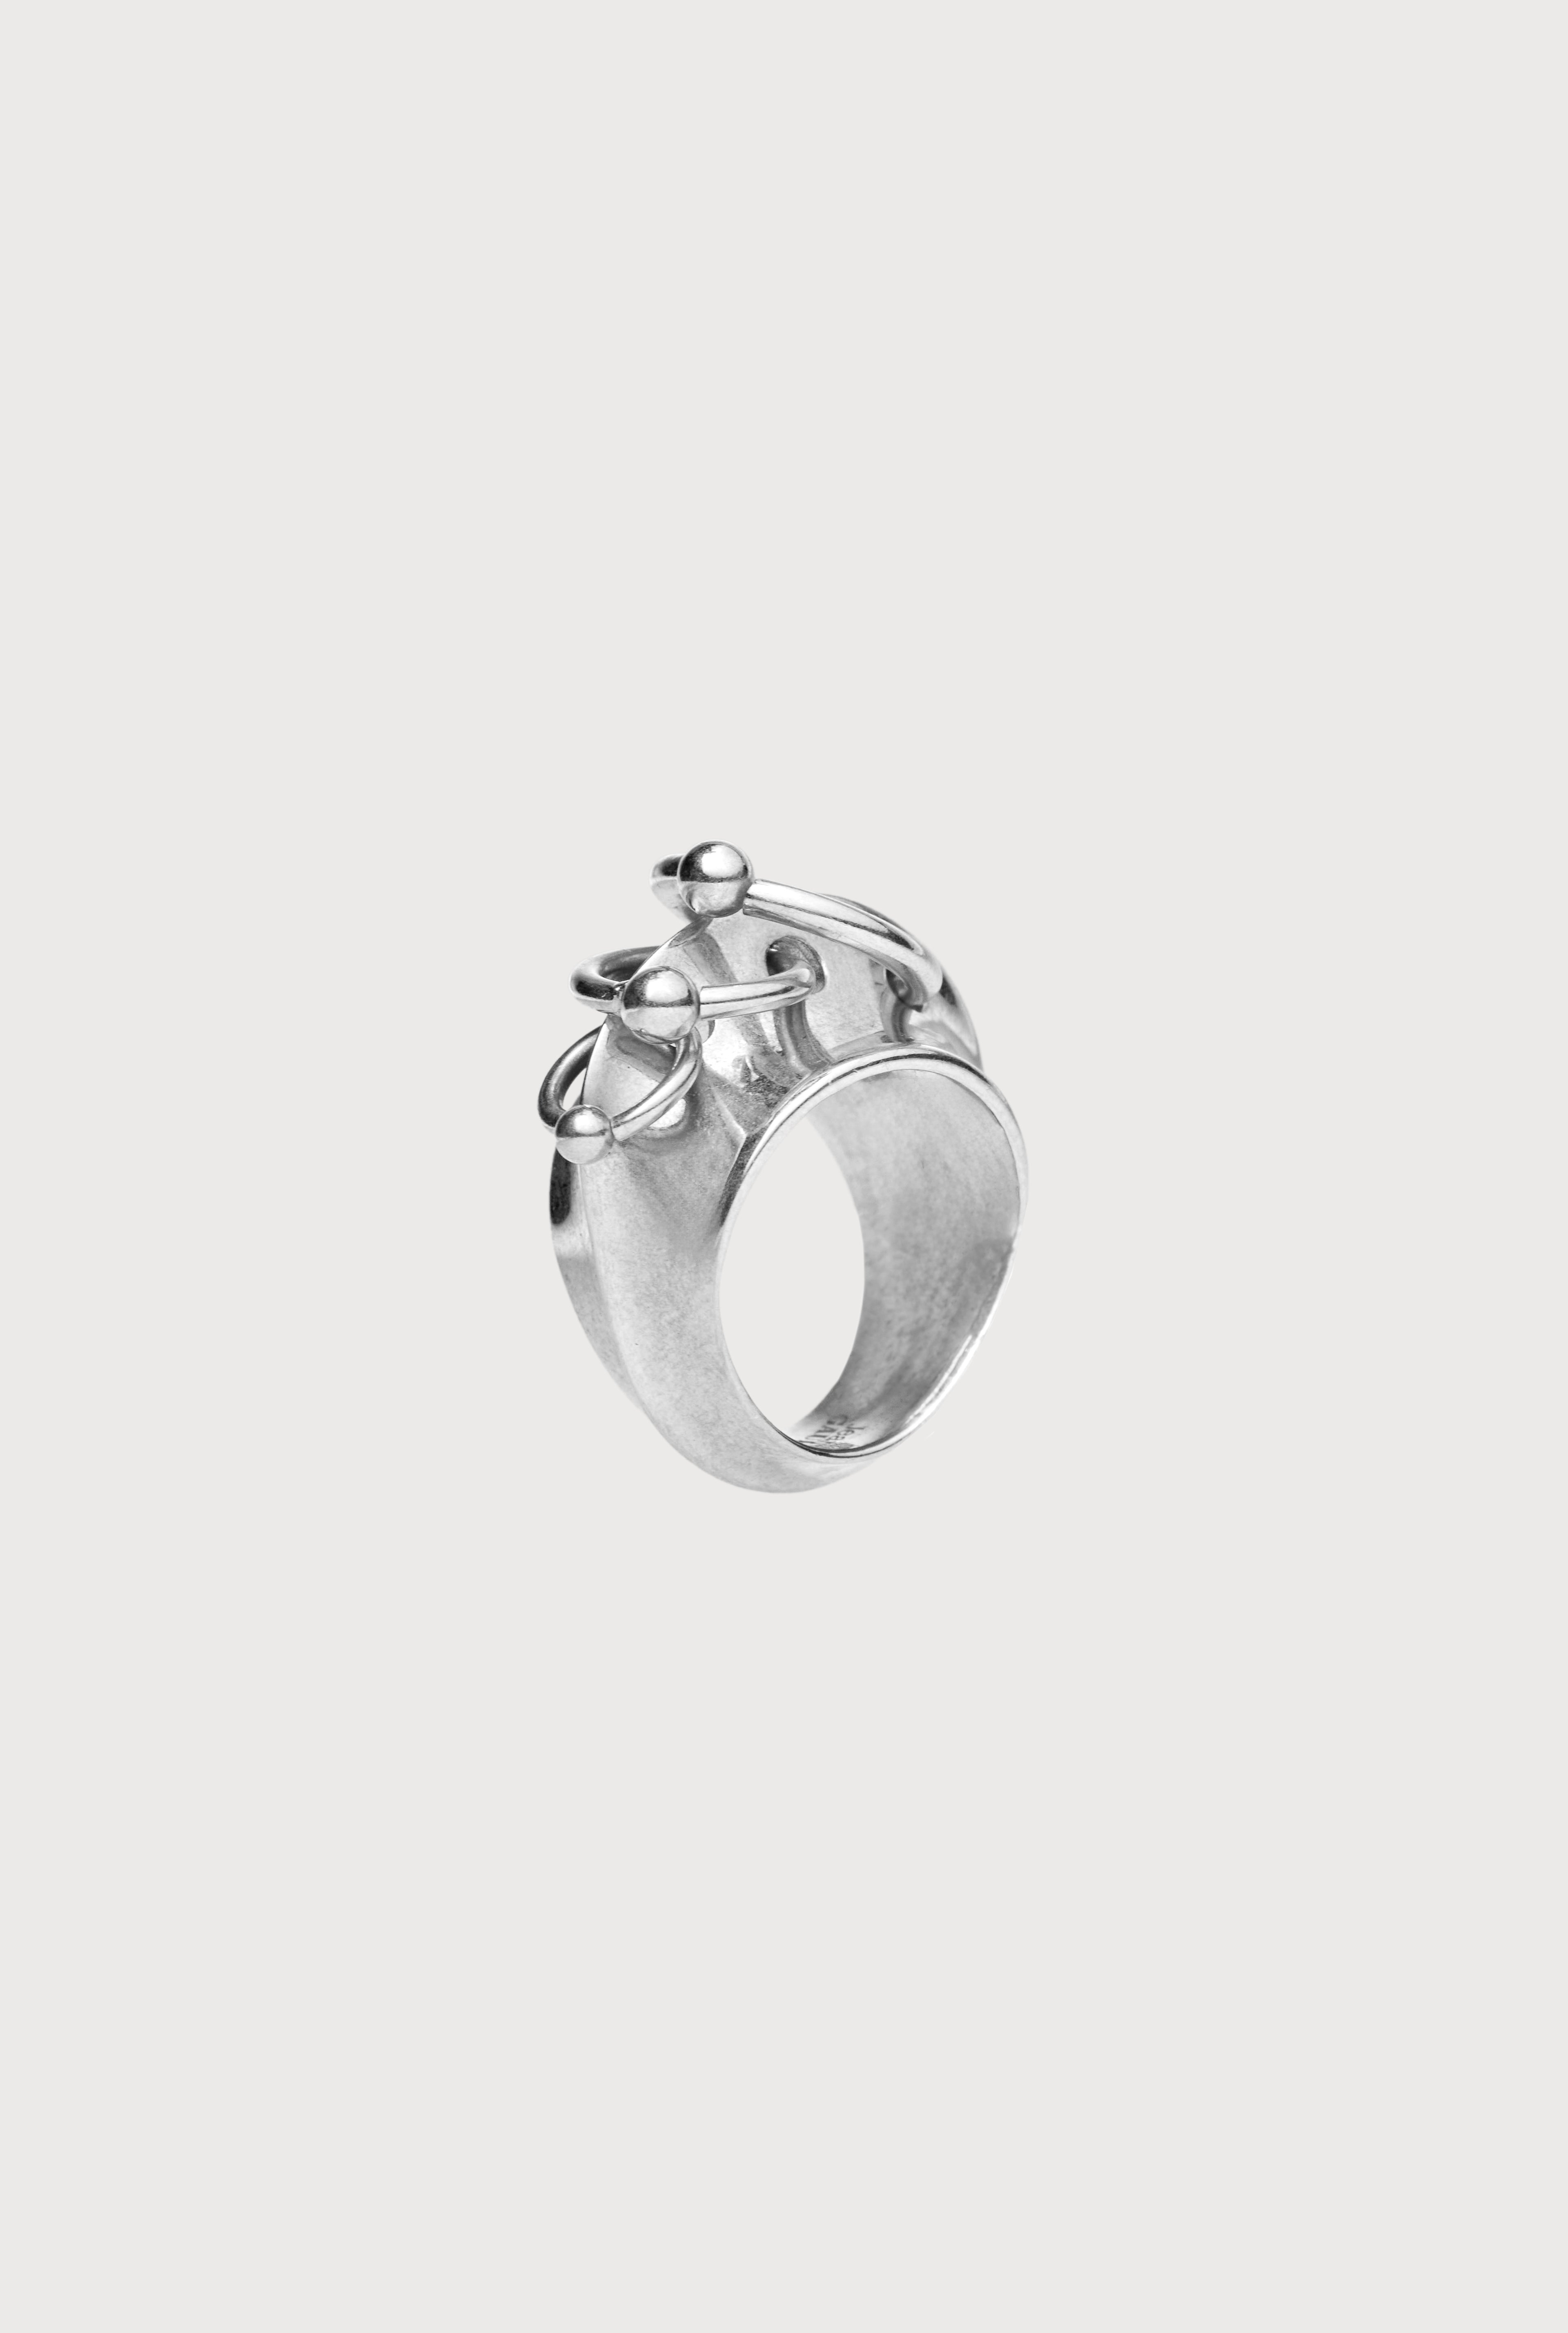 The Silver-Tone Piercing Ring